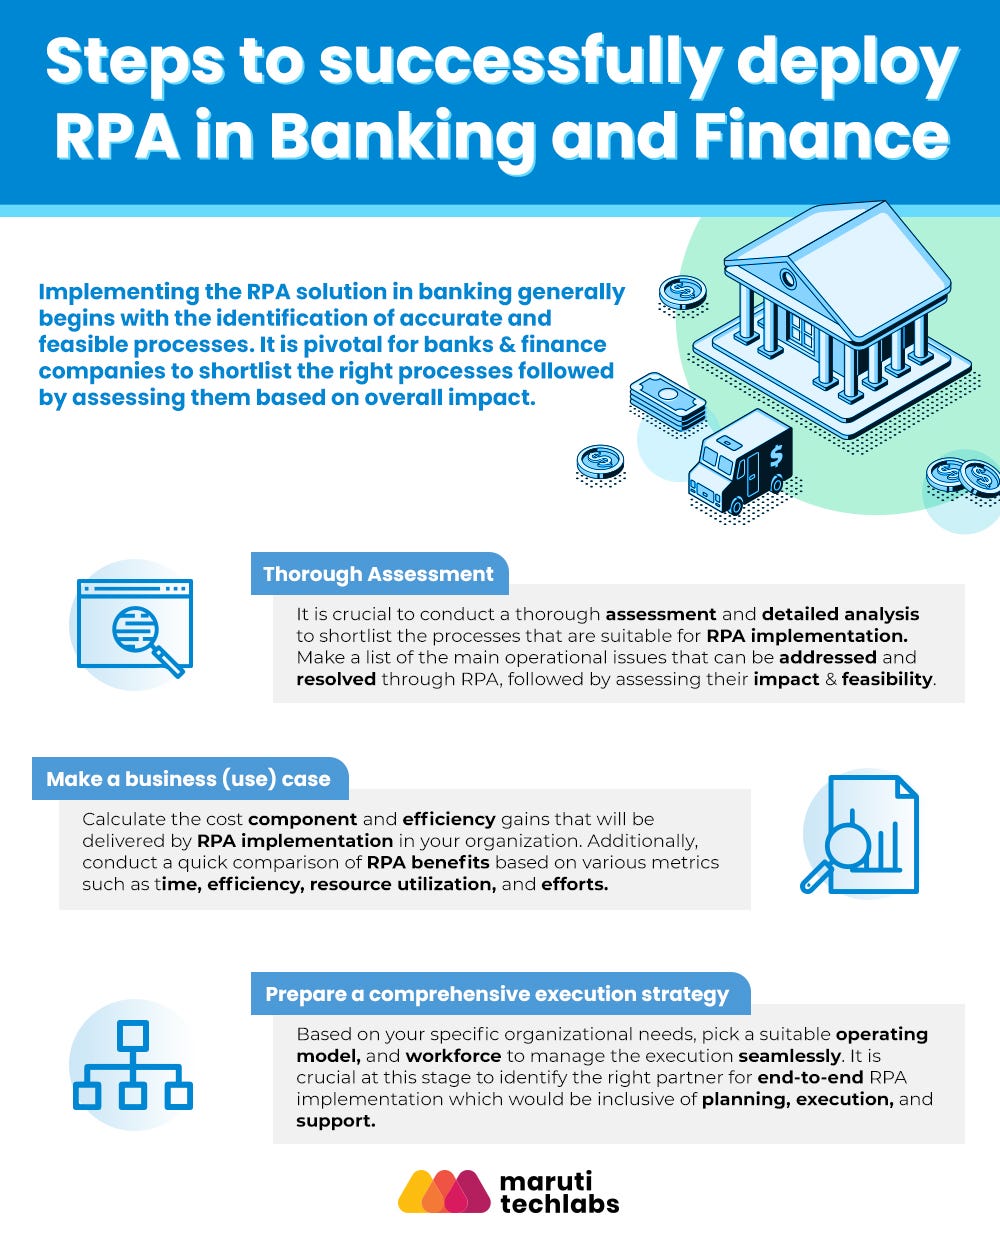 RPA in Banking — Use-cases, Benefits and Steps | by Maruti Techlabs | Medium